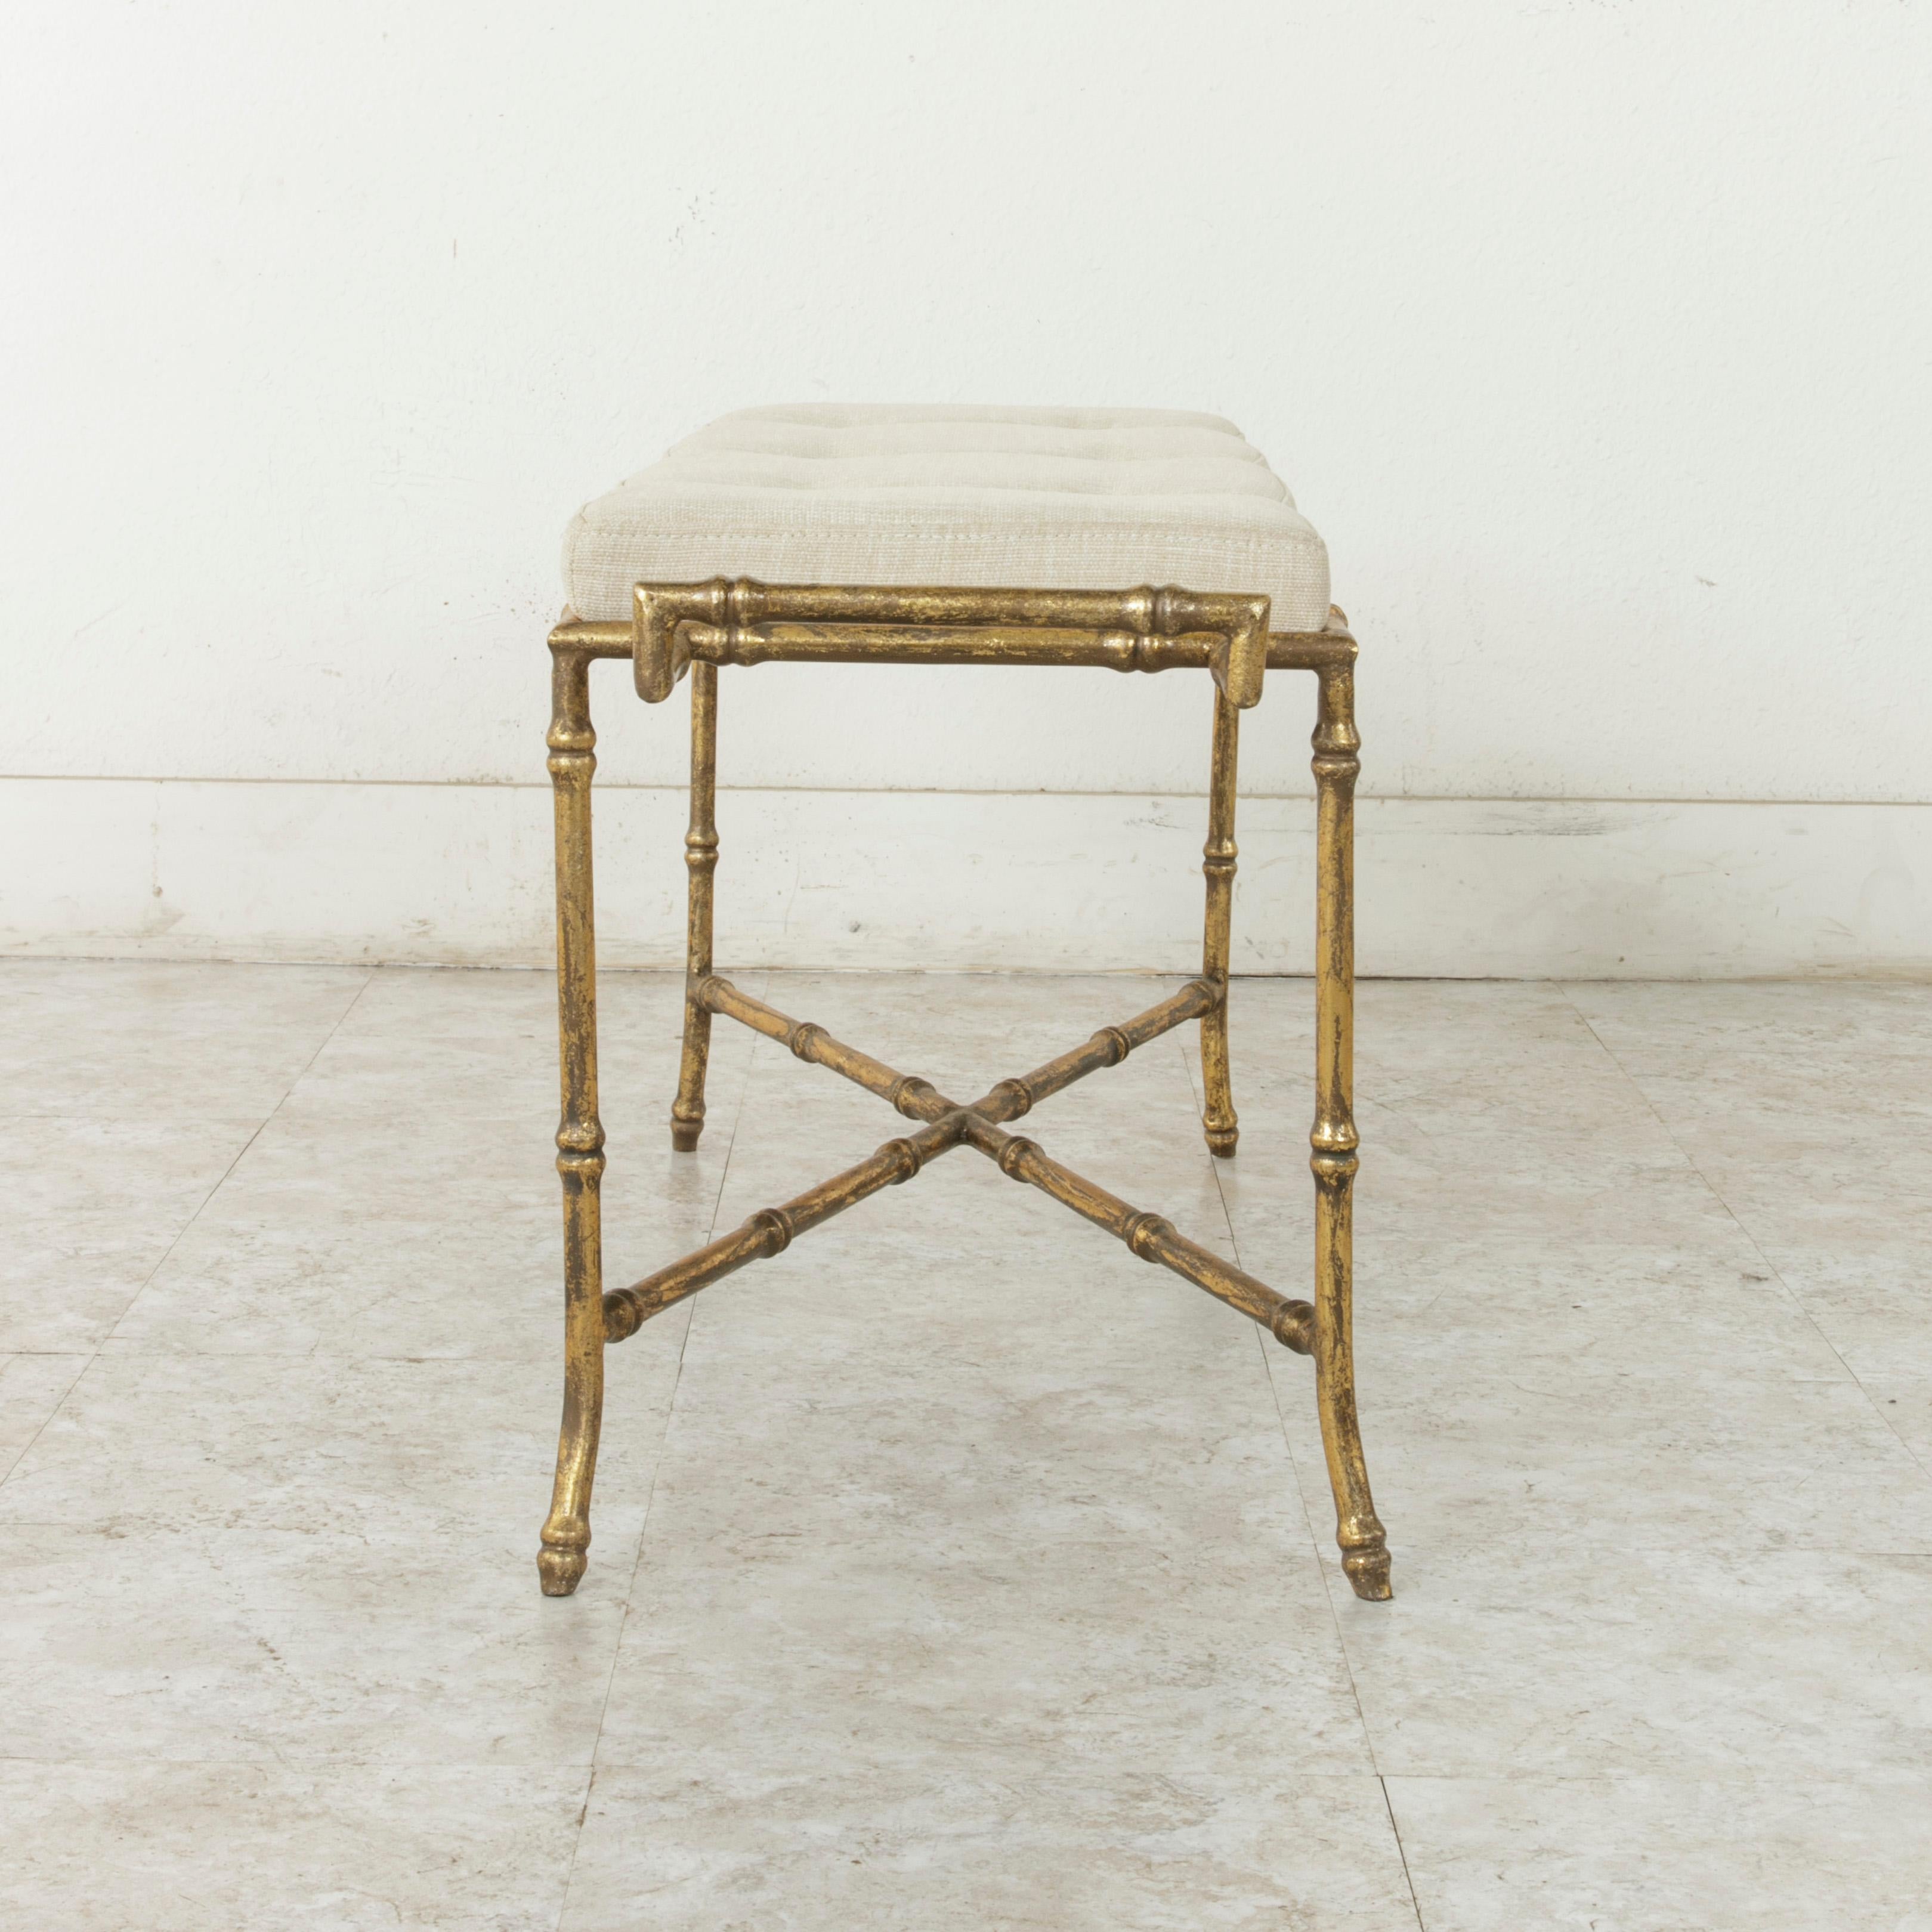 Gilt French Gilded Iron Banquette or Bench with Linen Upholstered Cushion